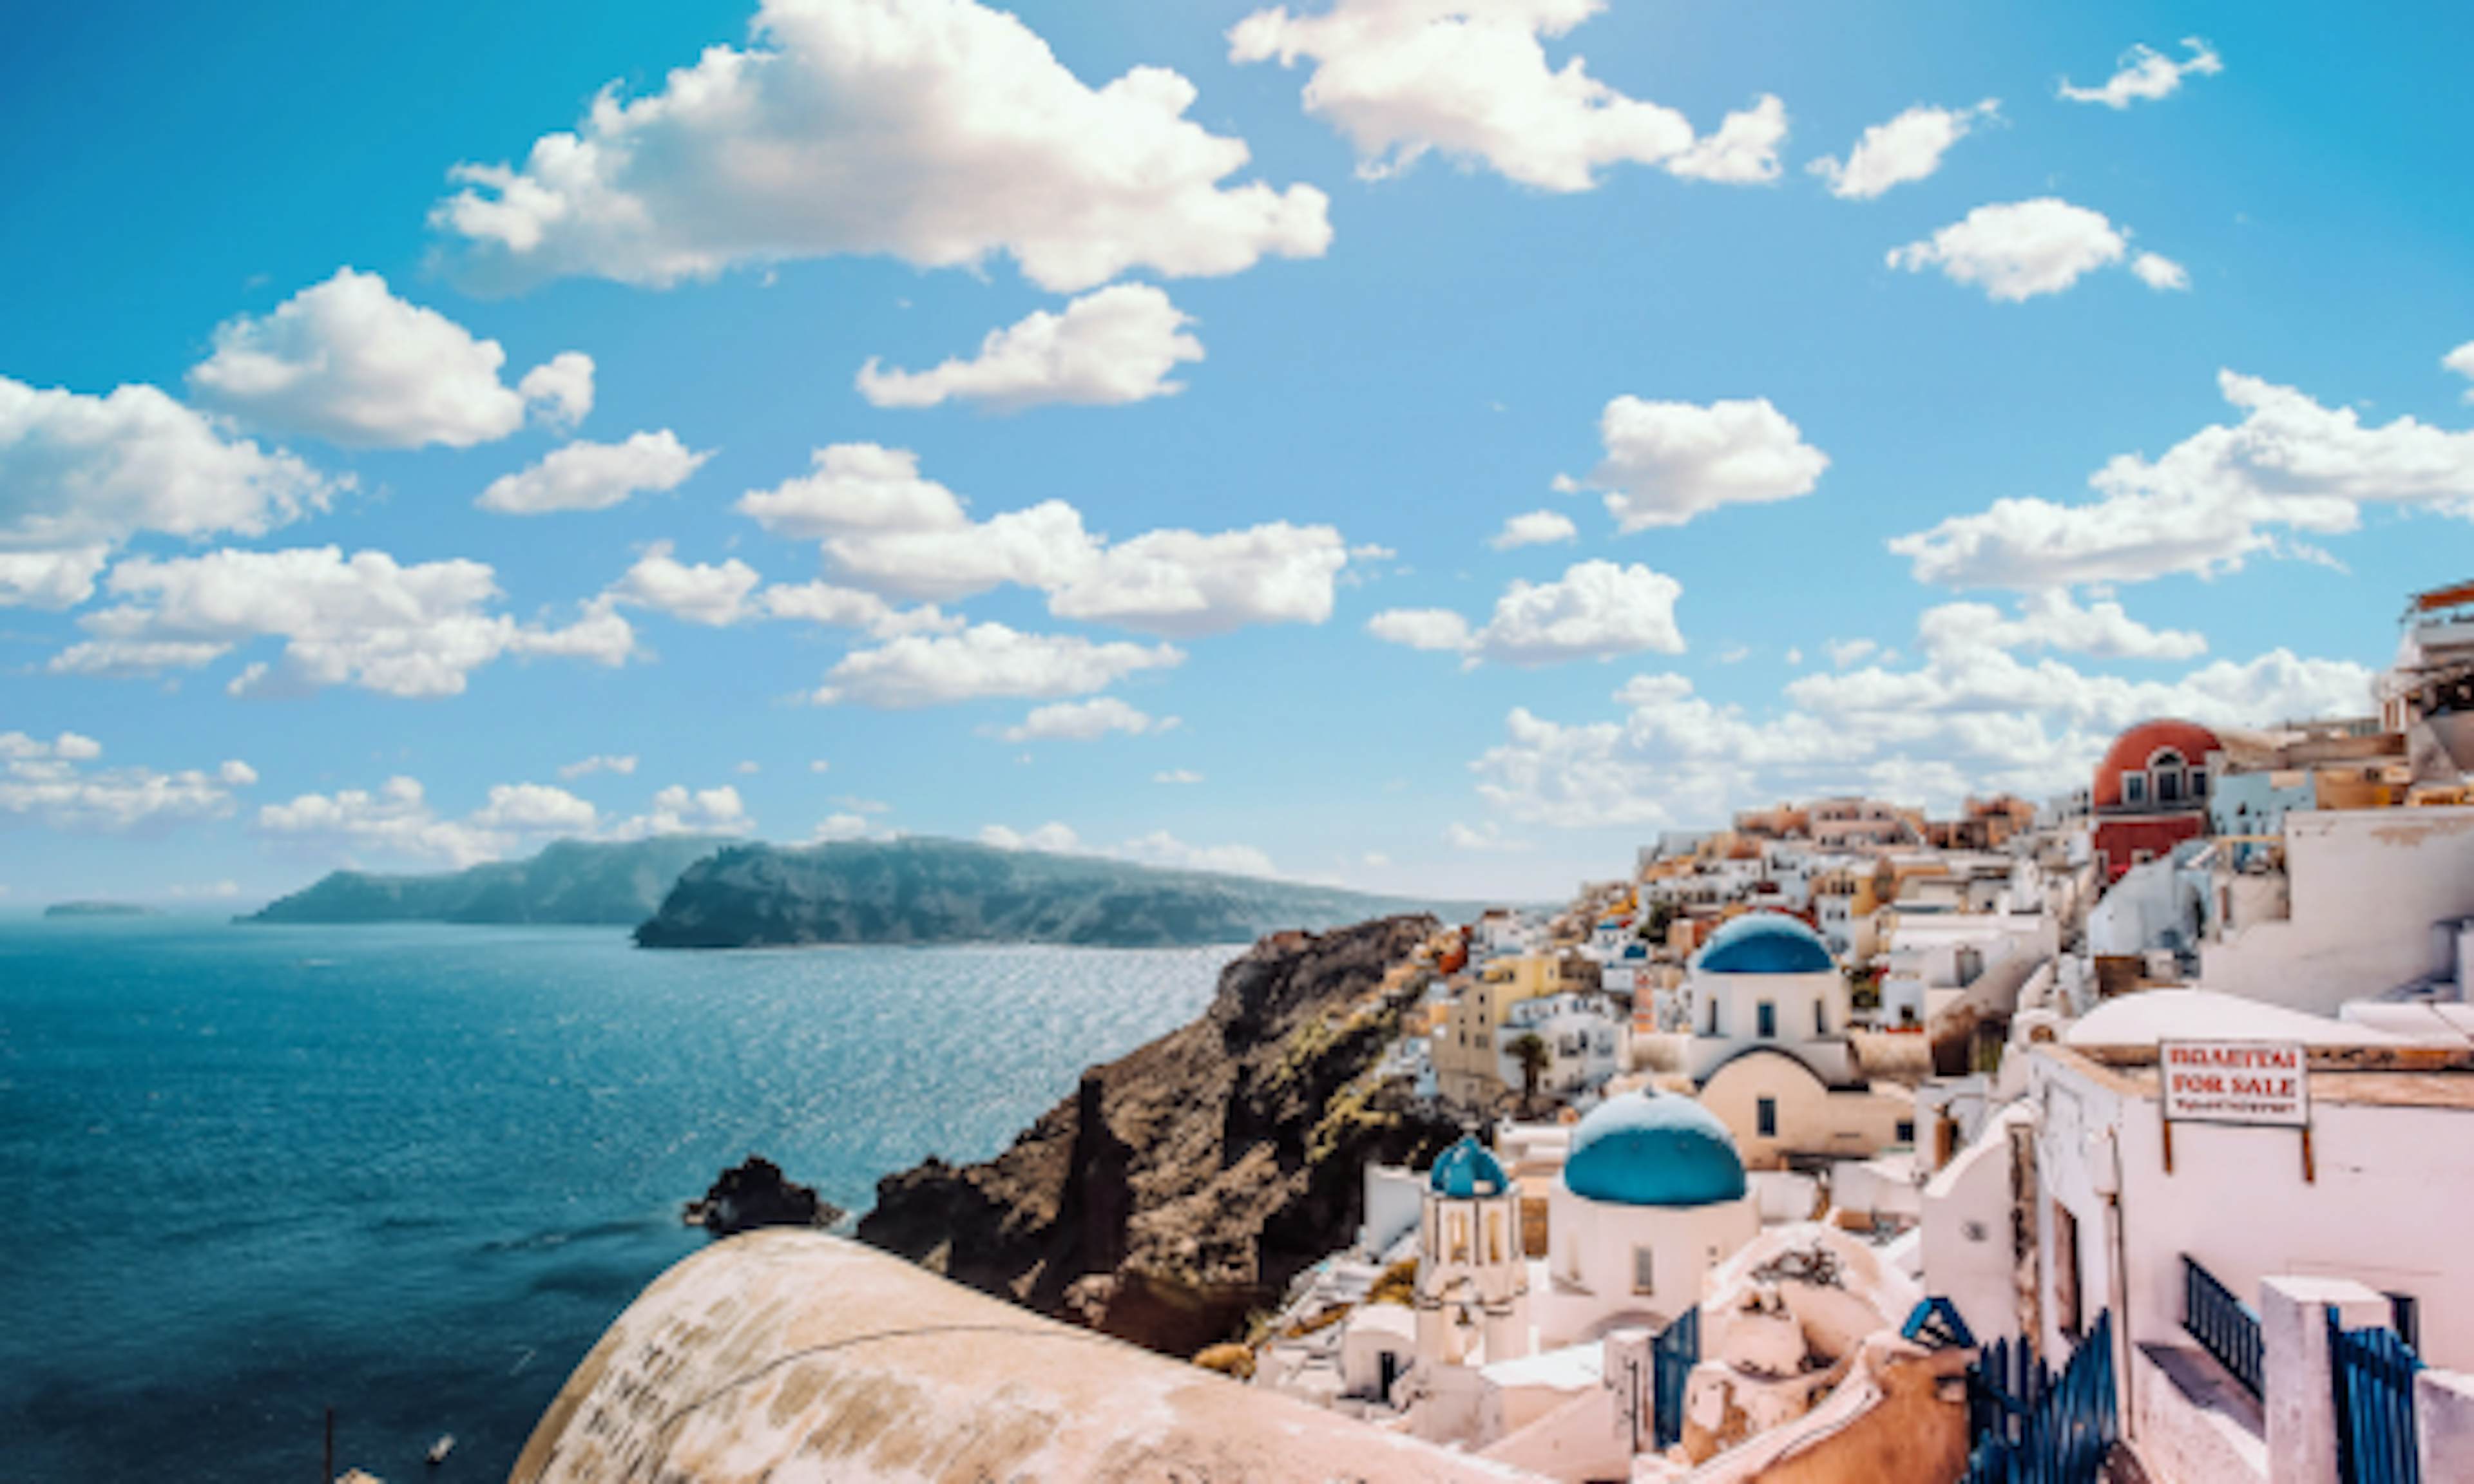 Santorini, Greece. White washed houses on side of hill, blue roofs. Sunny skies with white clouds.